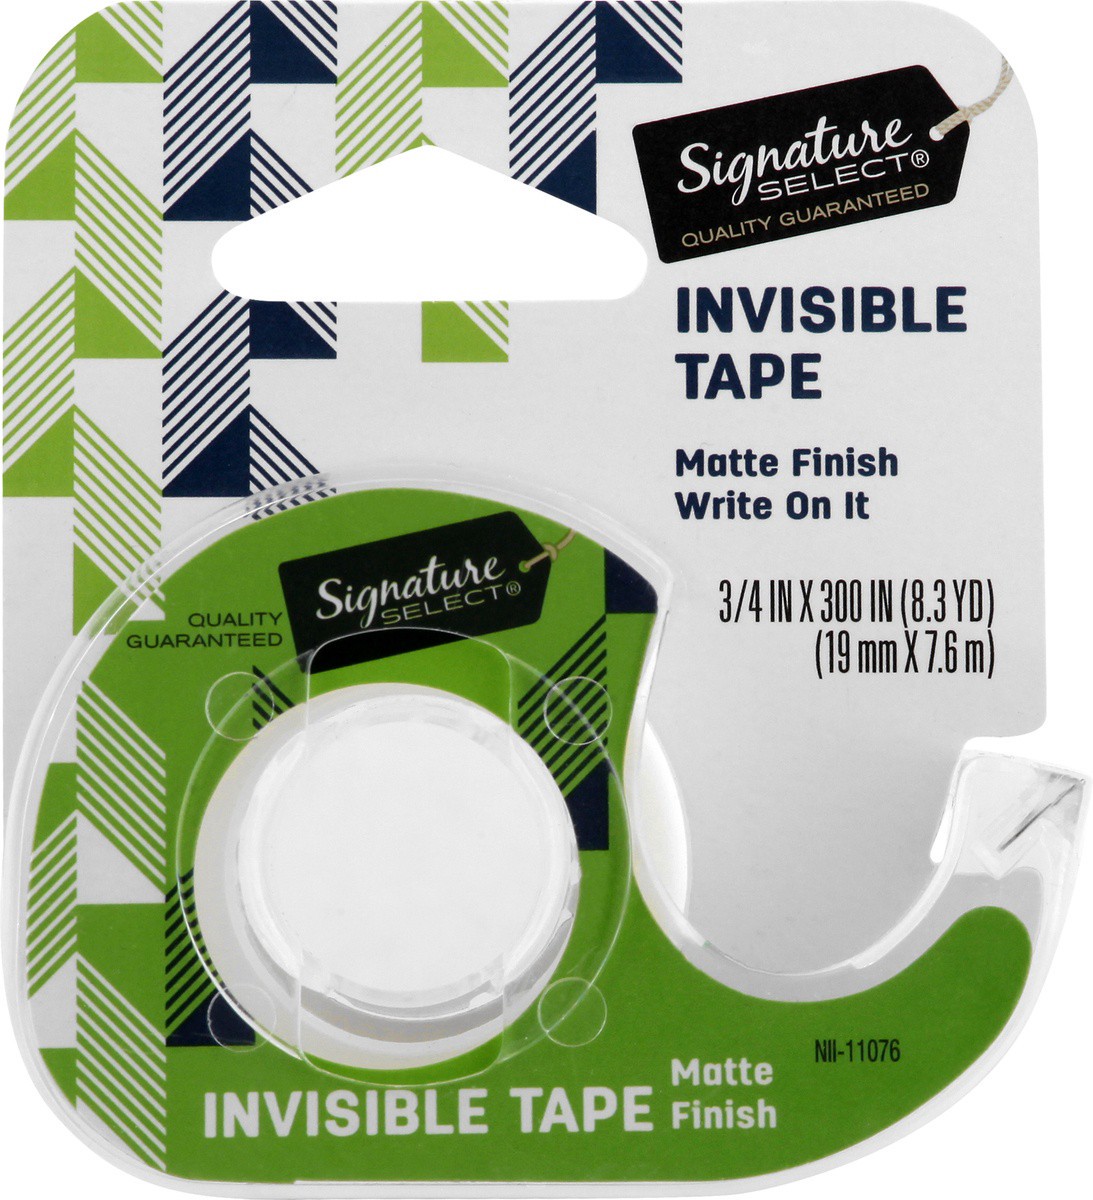 slide 6 of 7, Signature Home Tape Invisible Matte Finish 3/4 IN X 300 IN, 1 ct